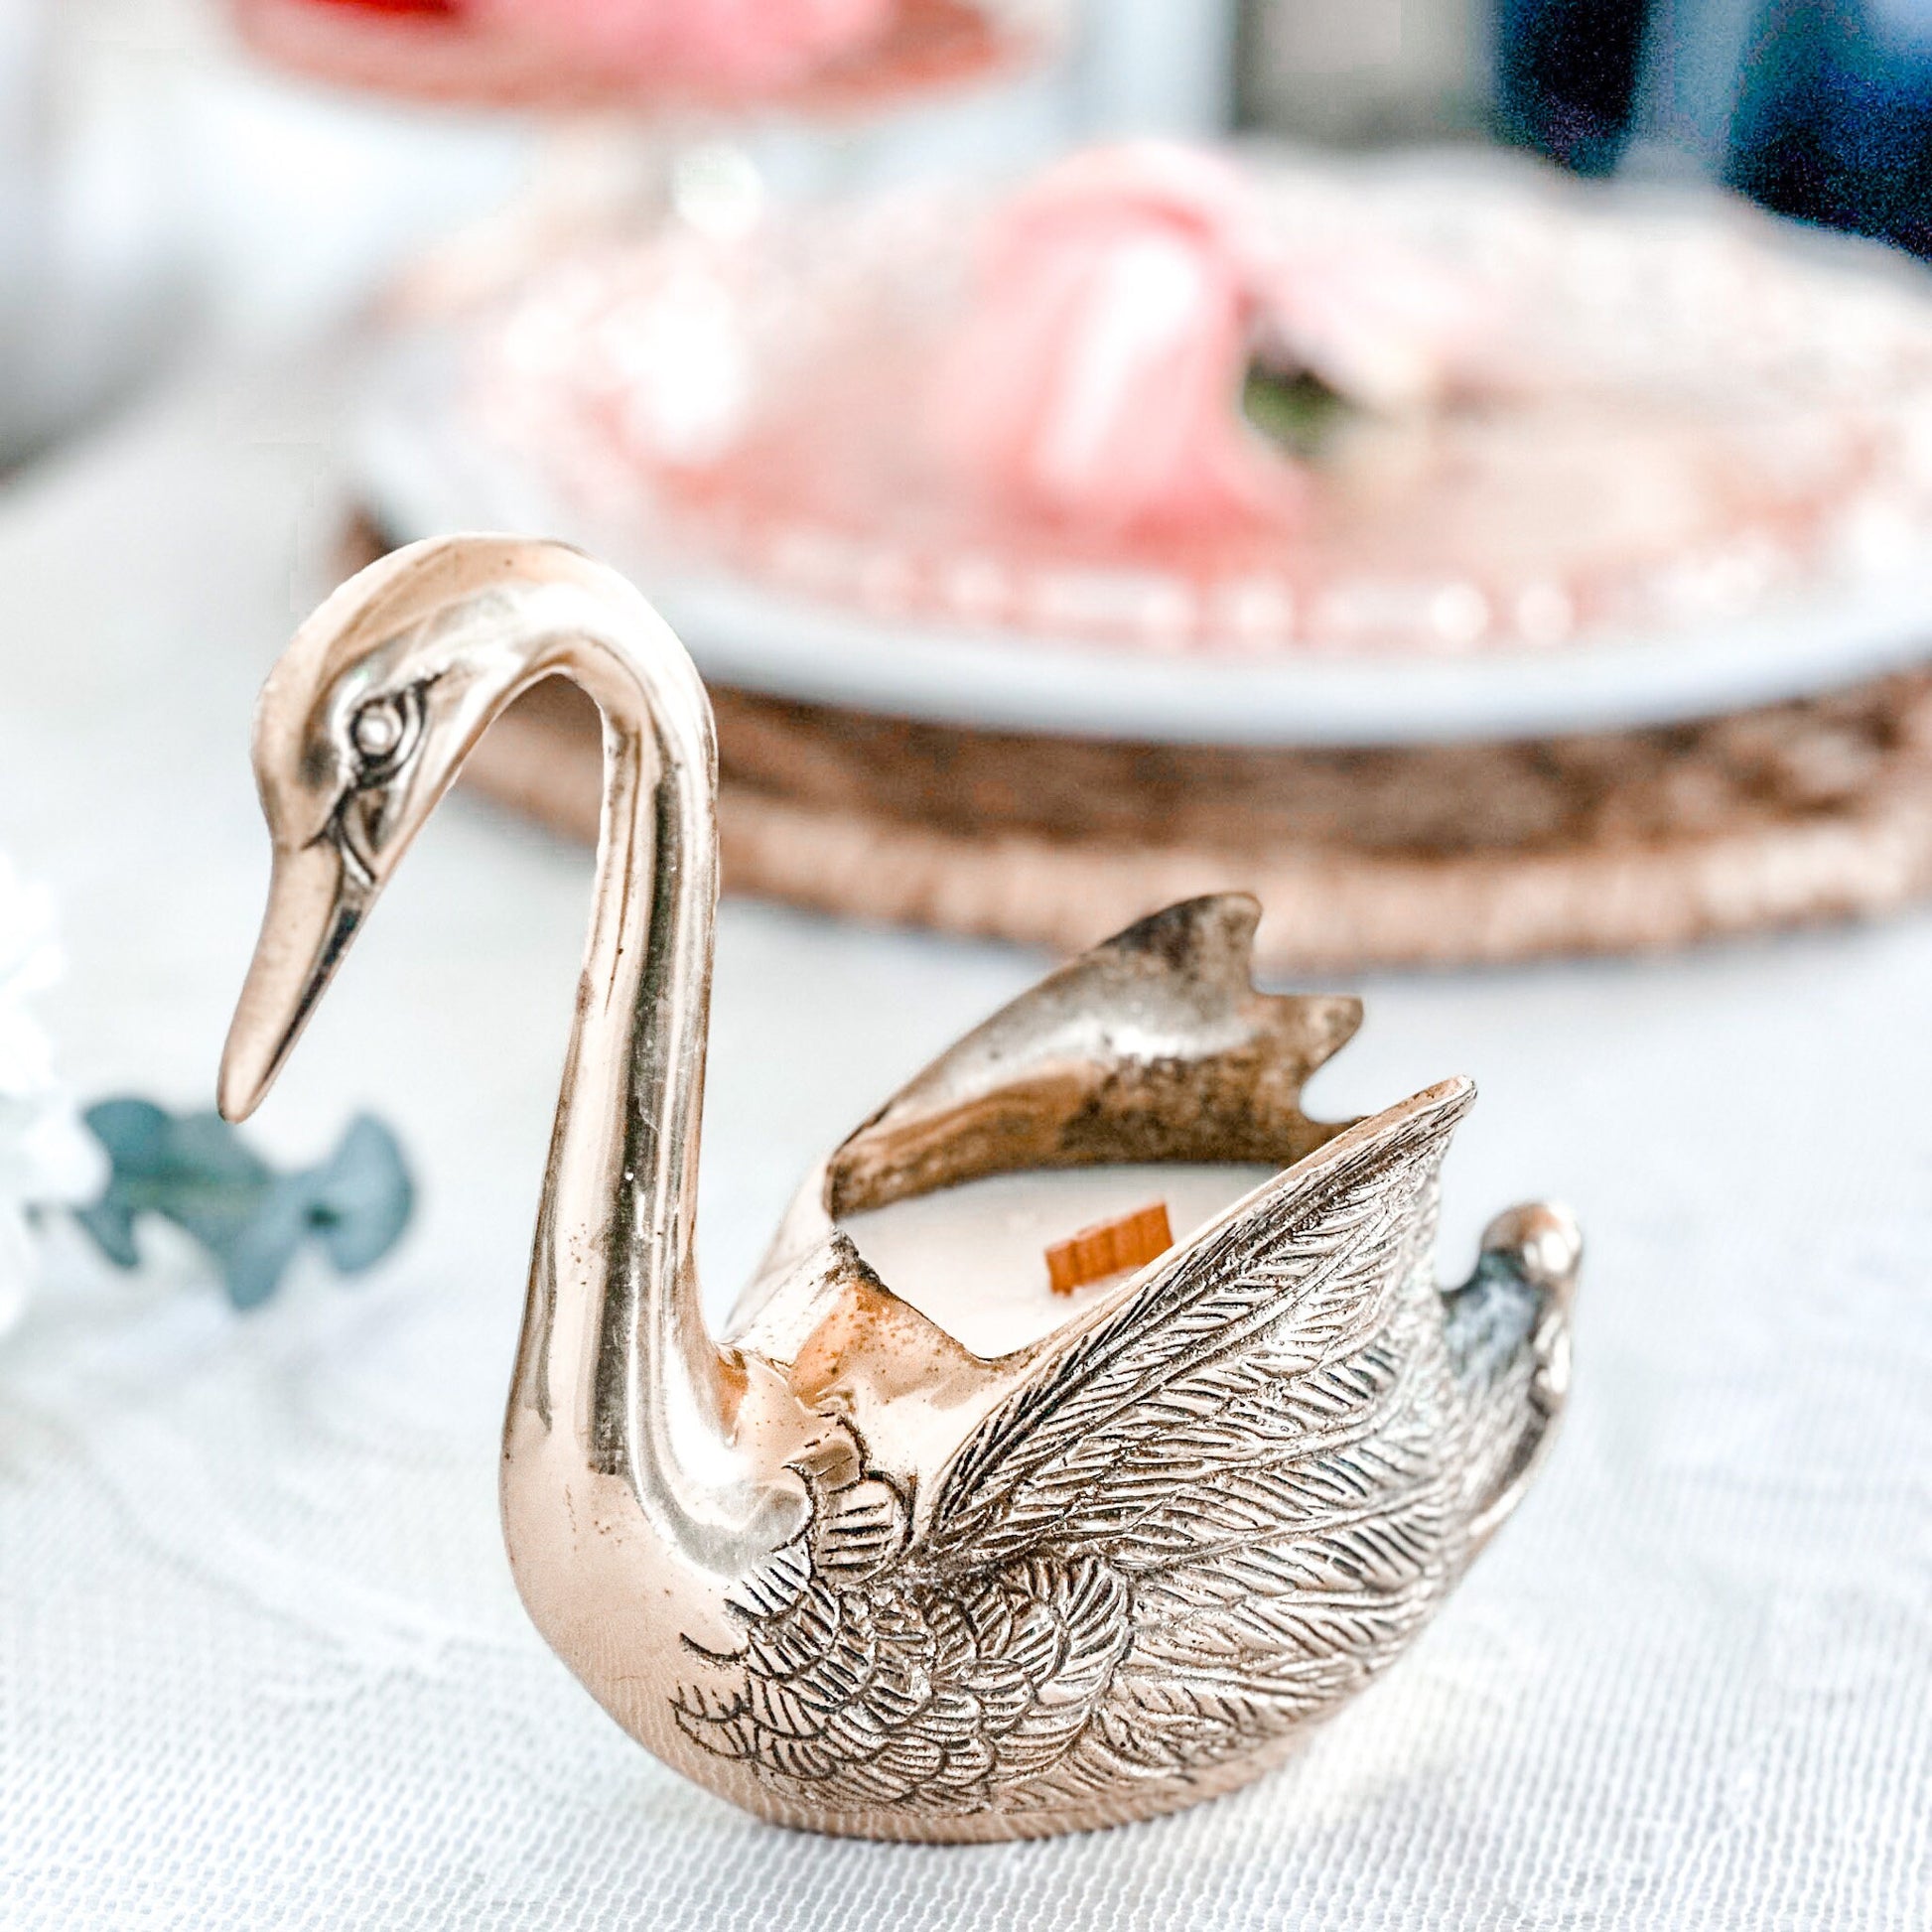 Scented Candle, Brass, Swan, Best Friend Gifts, Housewarming Gift